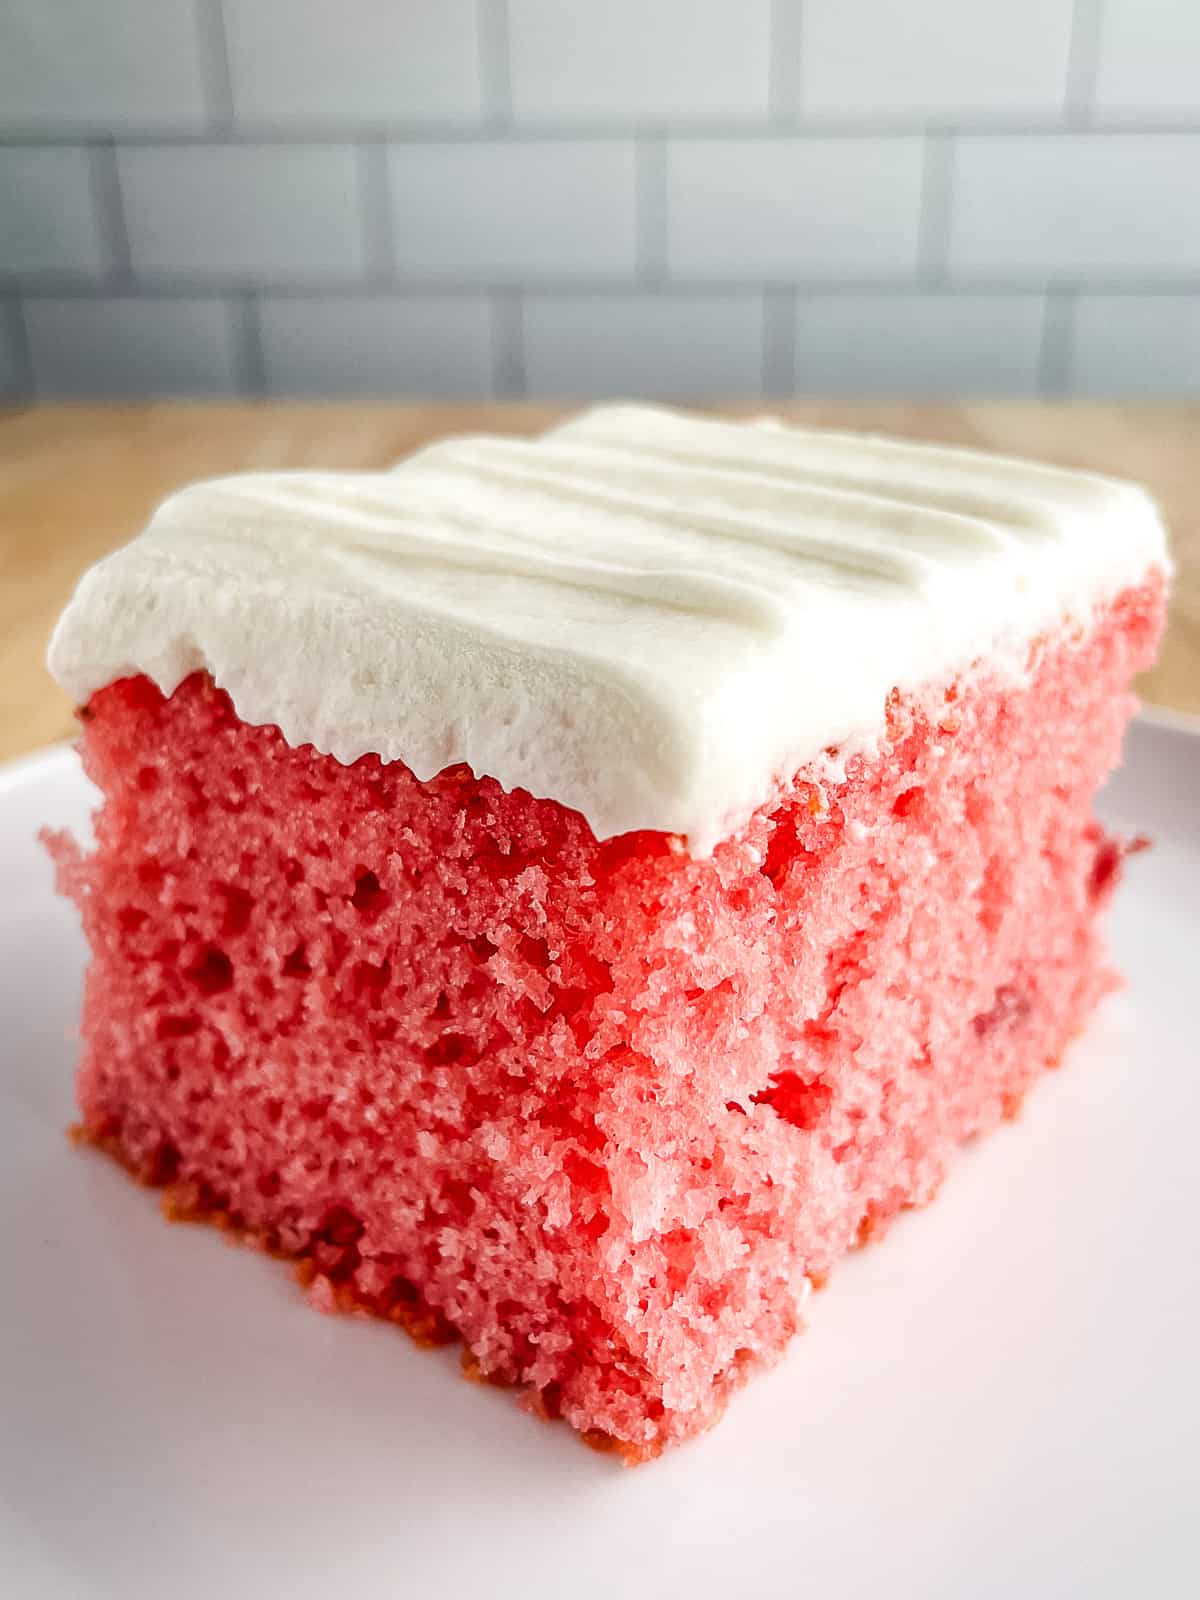 Slice of strawberry cake on a plate. Cake is frosted with cream cheese frosting. 